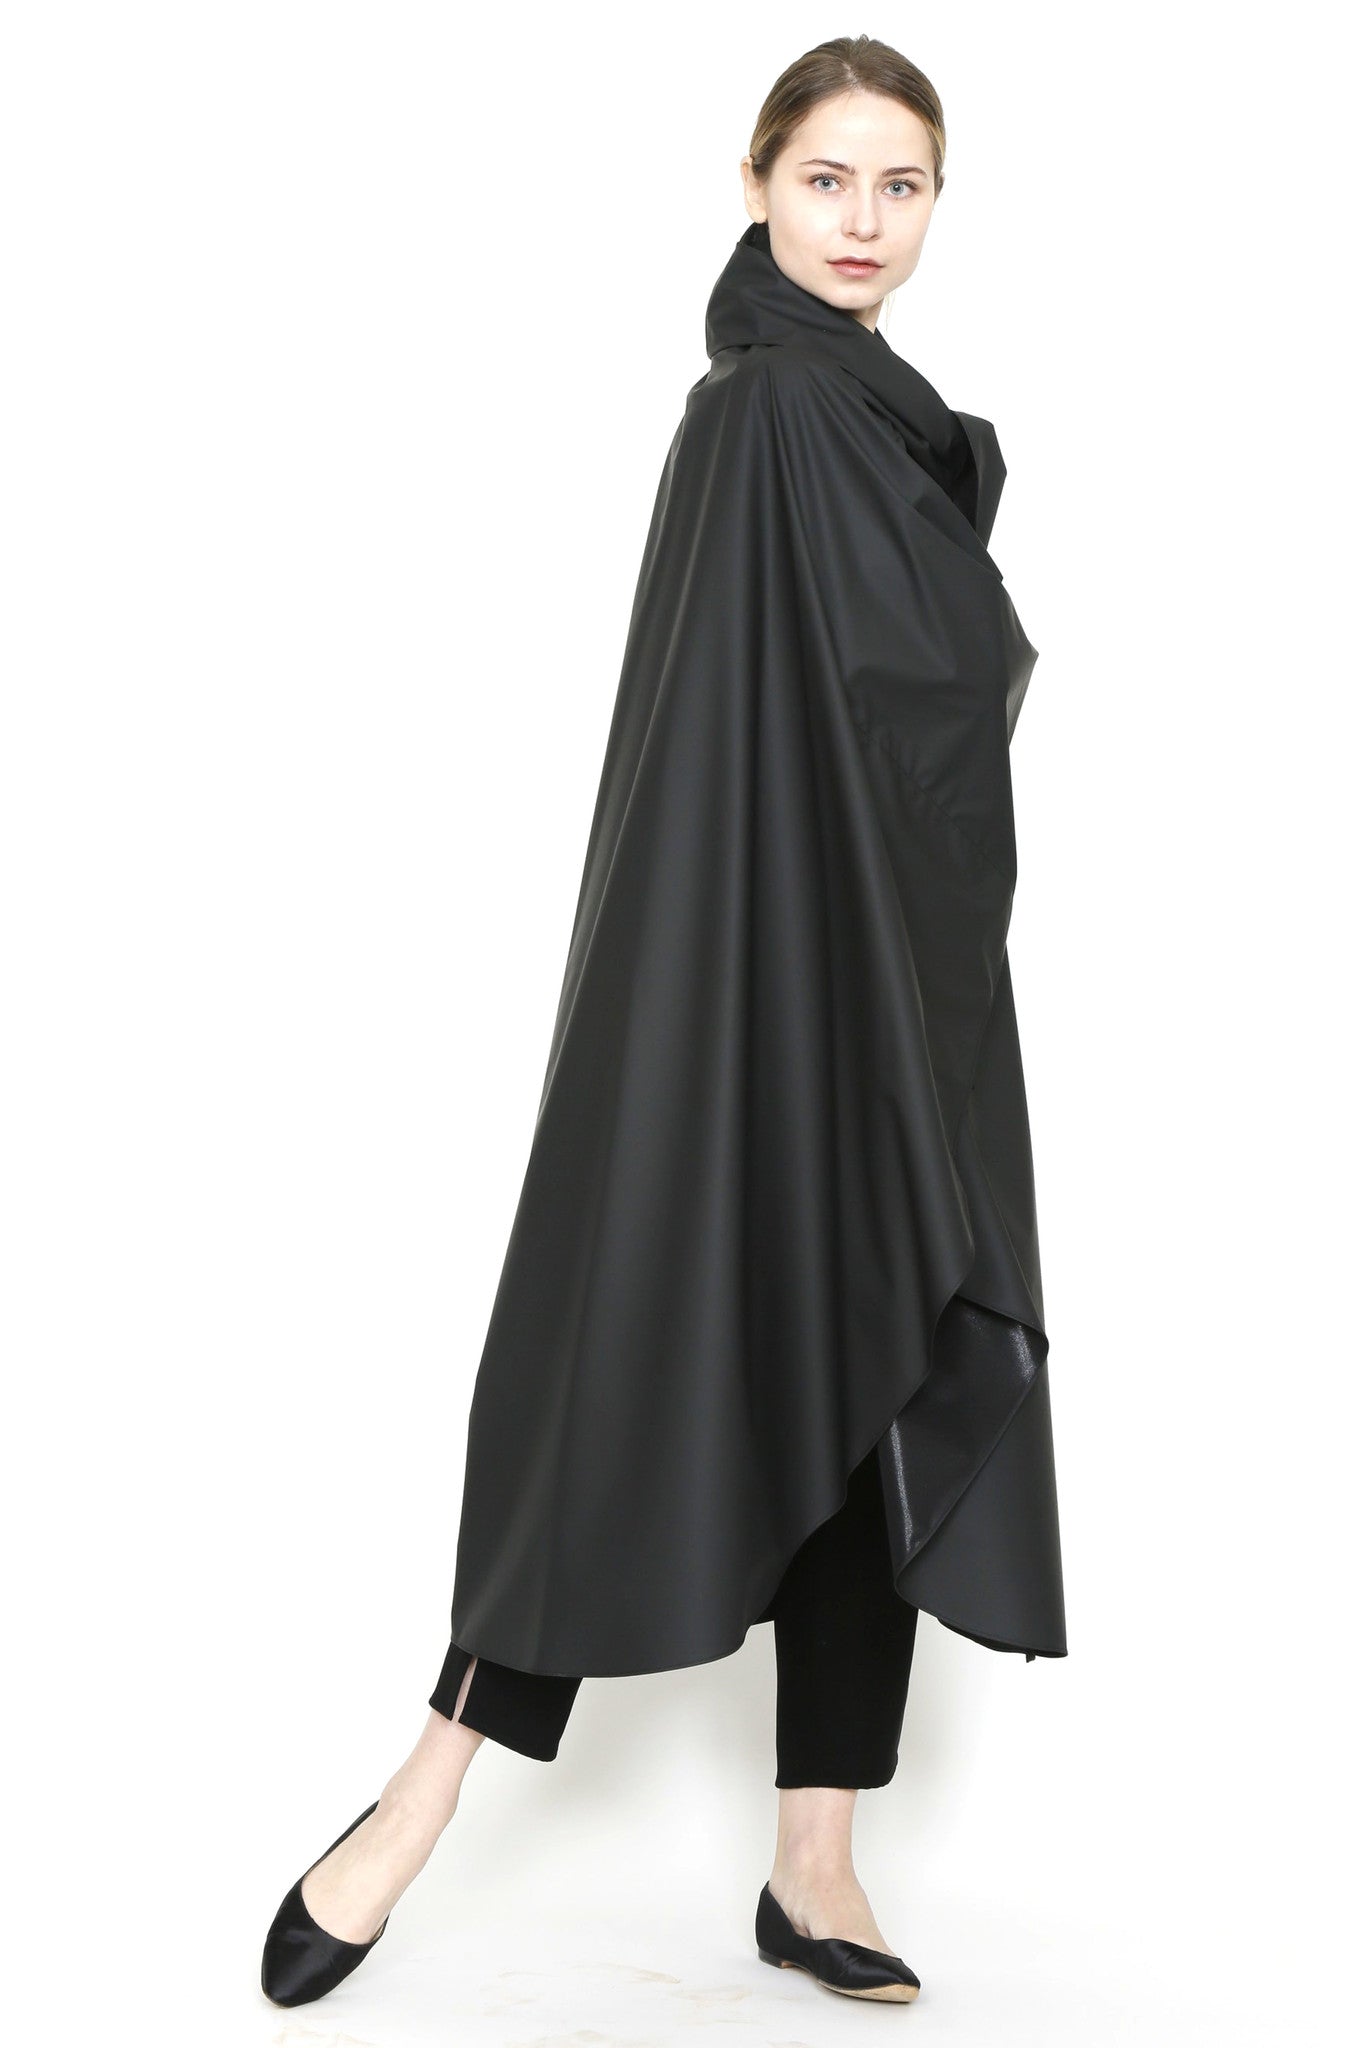 Zero Waste Sustainable One-Size-Fits-All Rain Cape in Water-Repellent Fabric-4